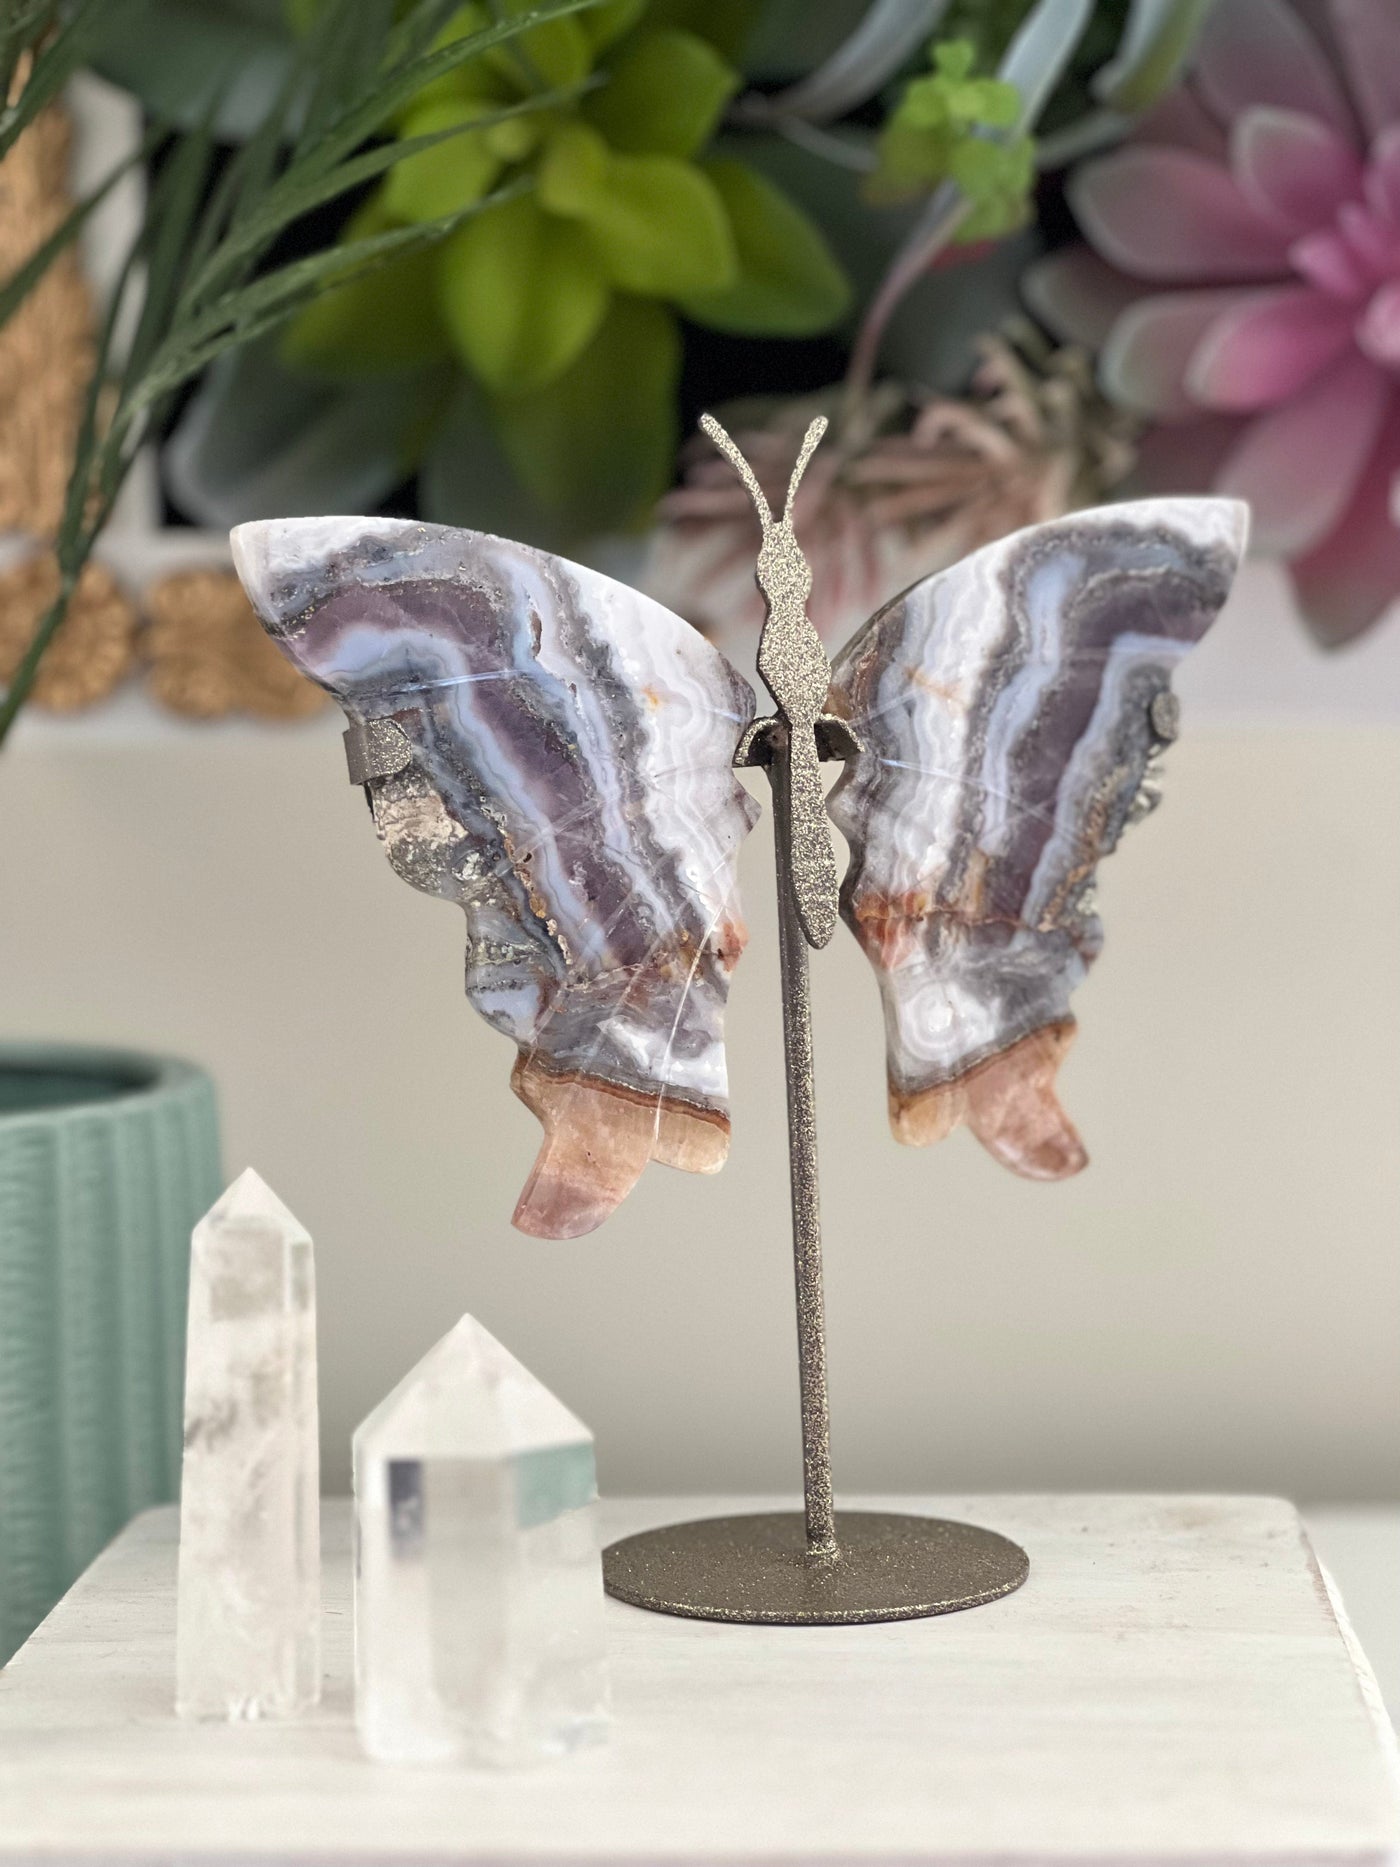 PURPLE CRAZY LACE AGATE BUTTERFLY WINGS ON STAND (RARE) Revive In Style Vintage Furniture Painted Refinished Redesign Beautiful One of a Kind Artistic Antique Unique Home Decor Interior Design French Country Shabby Chic Cottage Farmhouse Grandmillenial Coastal Chalk Paint Metallic Glam Eclectic Quality Dovetailed Rustic Furniture Painter Pinterest Bedroom Living Room Entryway Kitchen Home Trends House Styles Decorating ideas